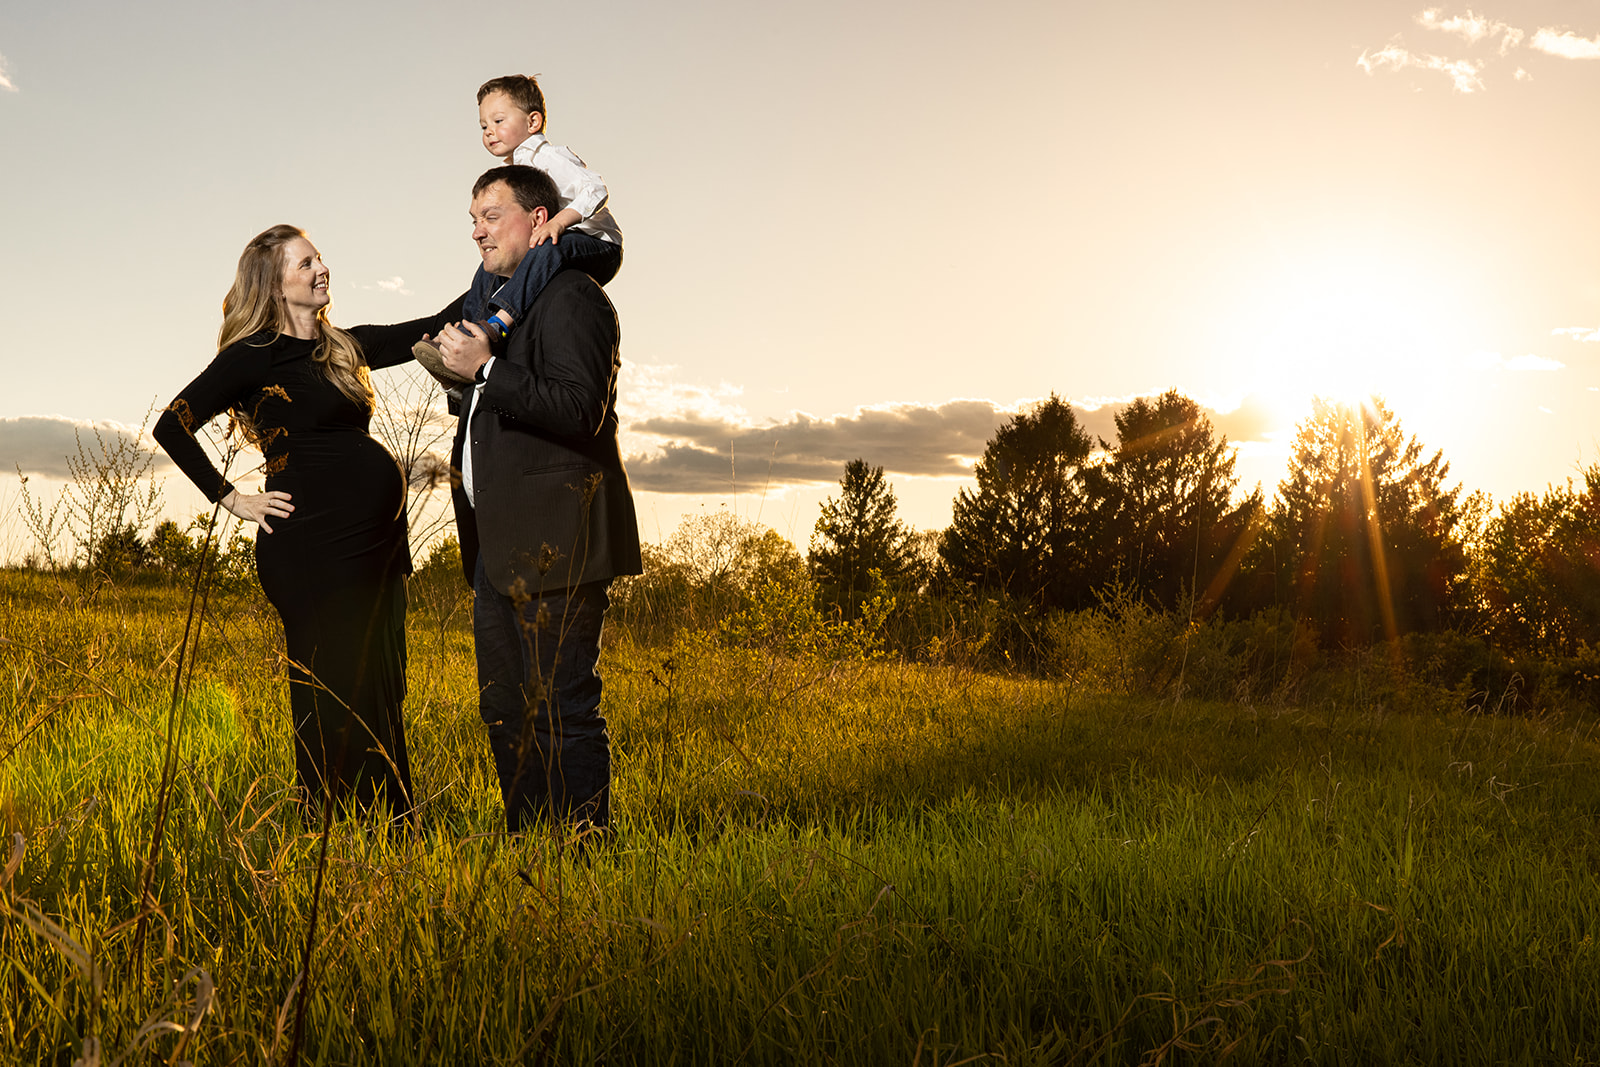 Sunset Serenity: Maternity Bliss, Hixon Forest by La Crosse photographer, Jeff Wiswell of J.L. Wiswell Photography